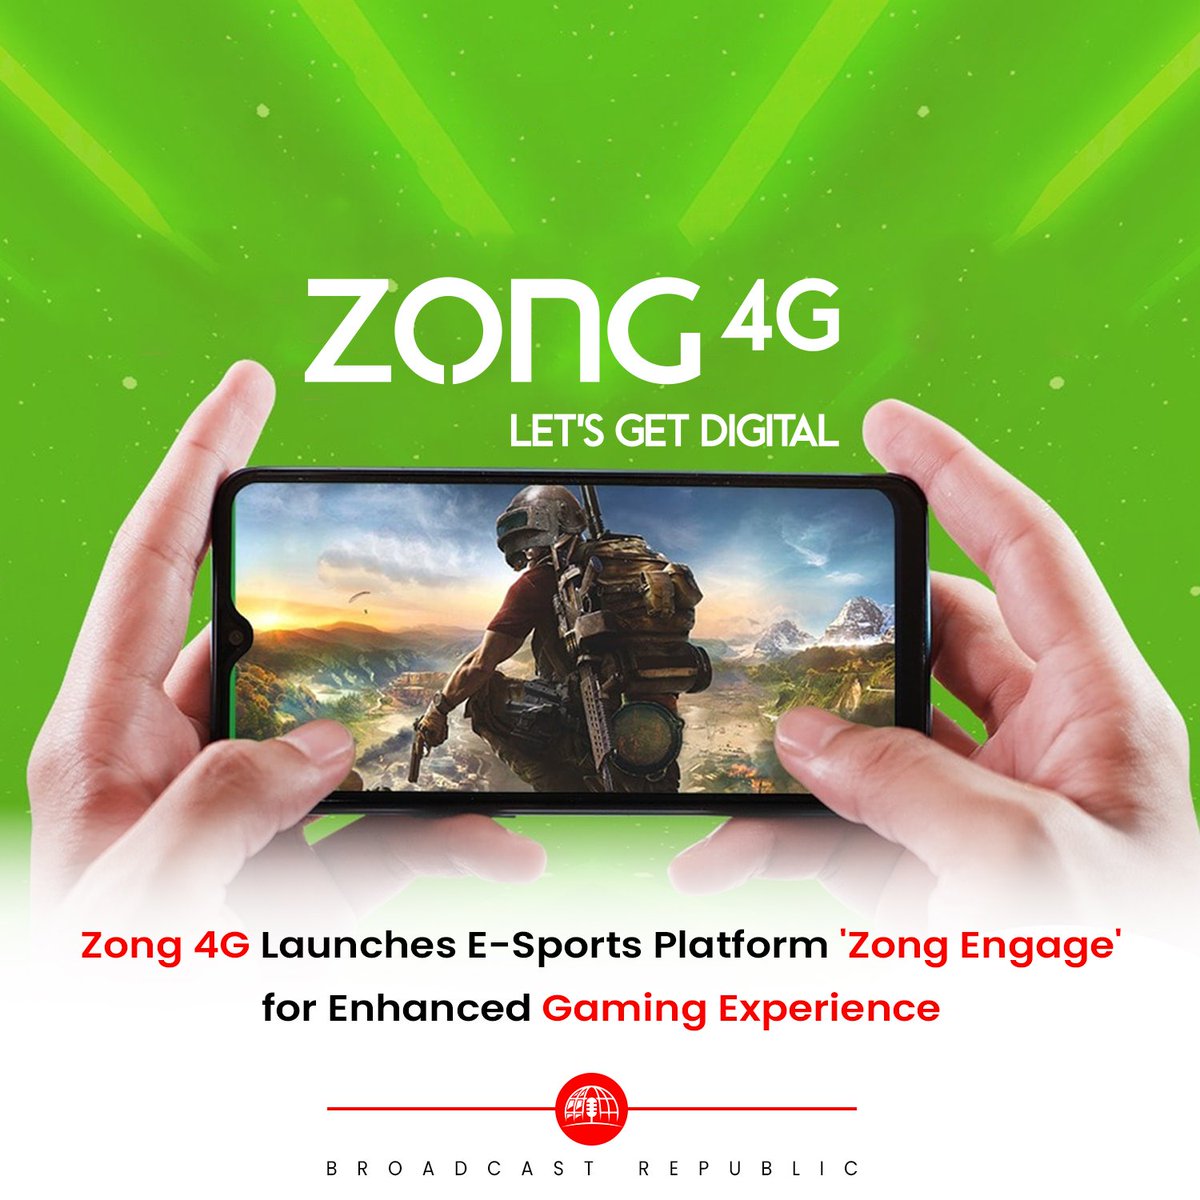 Zong 4G introduces 'Zong Engage,' Pakistan's first e-sports platform, aiming to amplify the gaming experience for the country's youth. 

#BroadcastRepublic #Zong4G #ZongEngage #ESportsPlatform #GamingCommunity #DigitalInnovation 
🌐 Read More: Broadcastrepublic.com